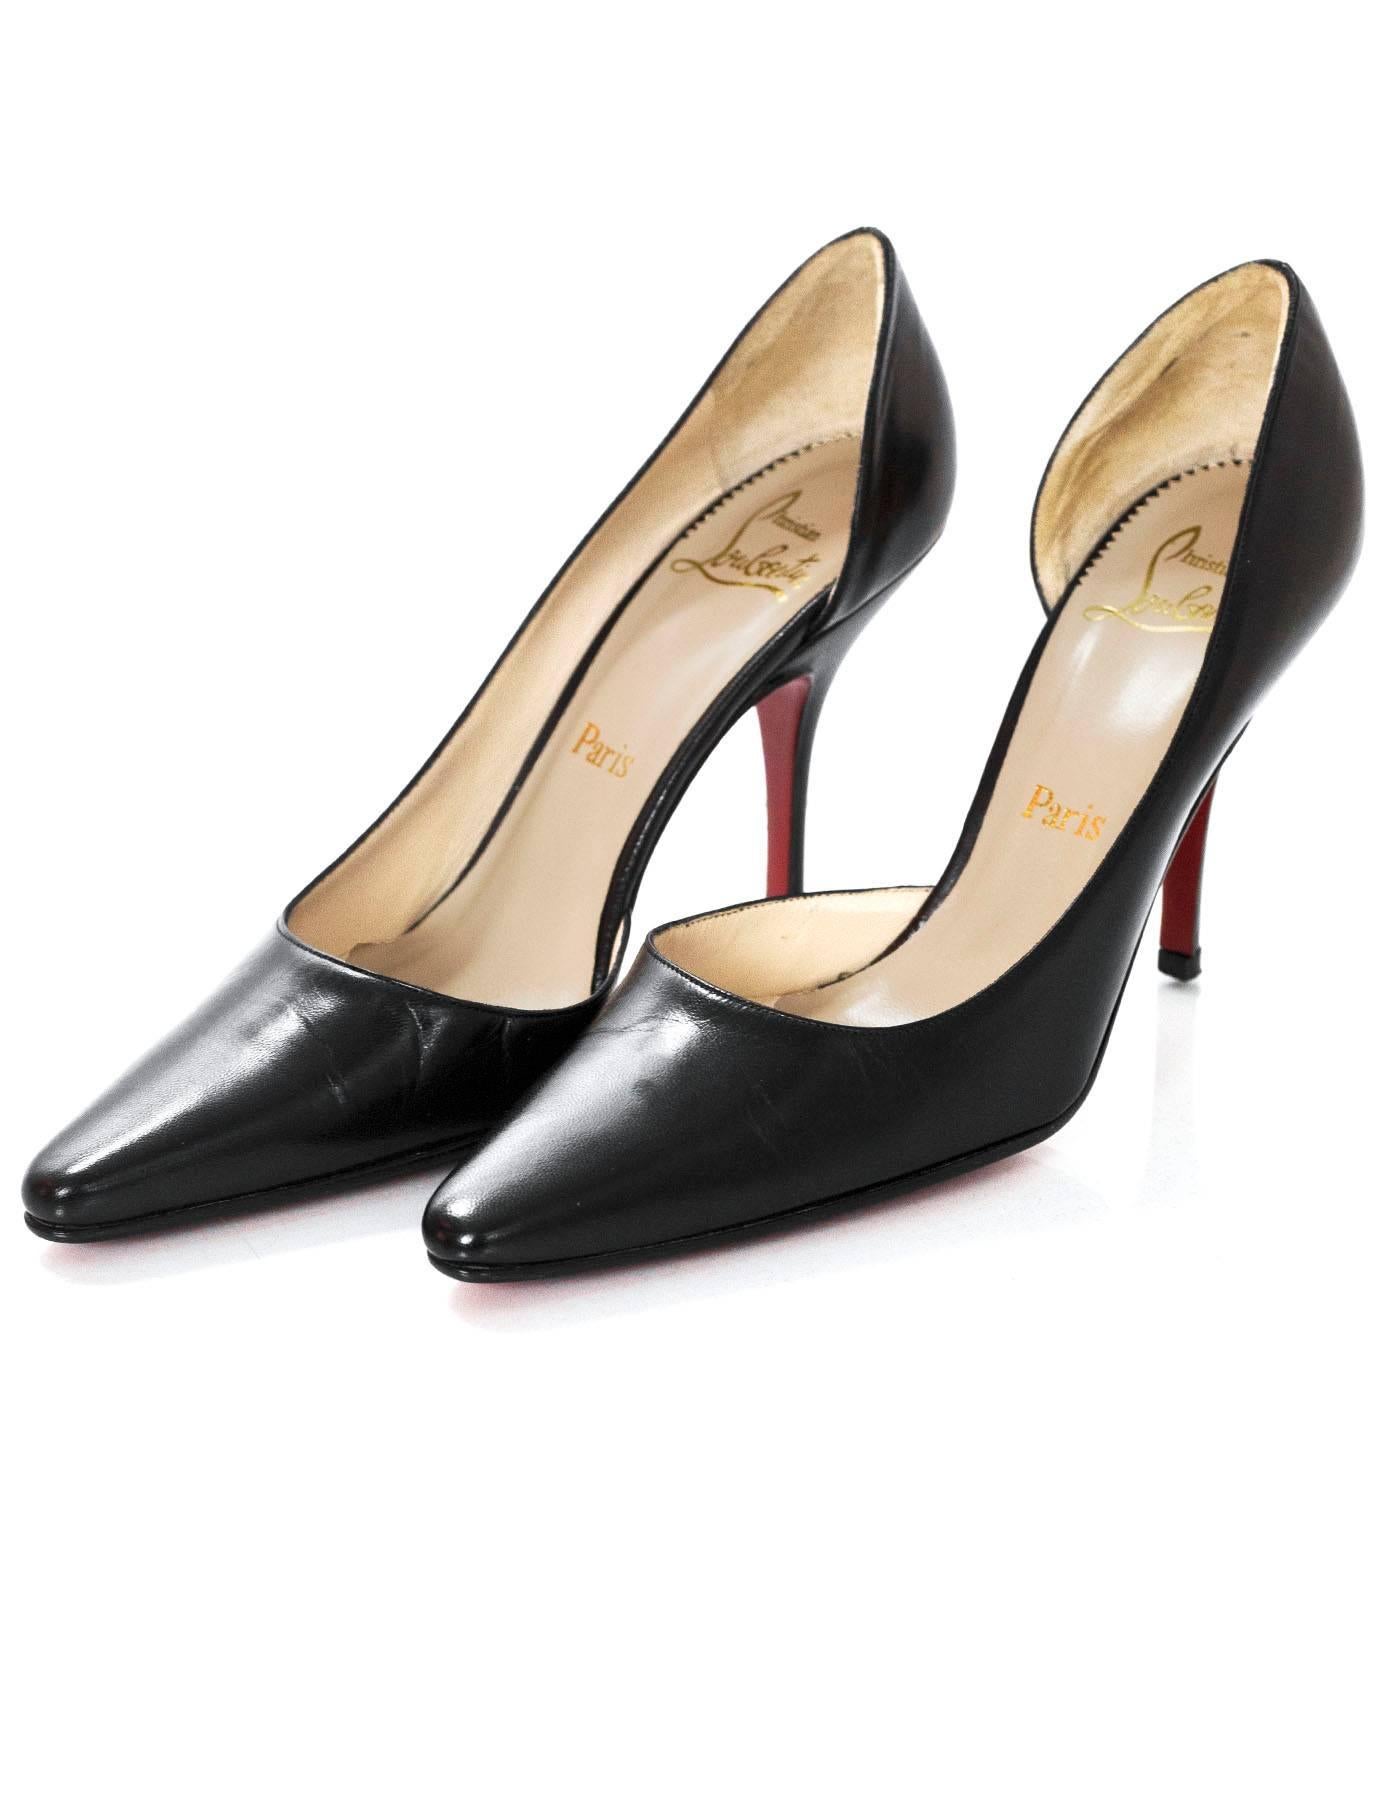 Christian Louboutin Black Leather d'Orsay Pumps Sz 37.5

Made In: Italy
Color: Black
Materials: Leather
Closure/Opening: Slide on
Sole Stamp: Christian Louboutin vero cuoio Made in Italy 37.5
Overall Condition: Excellent pre-owned condition with the